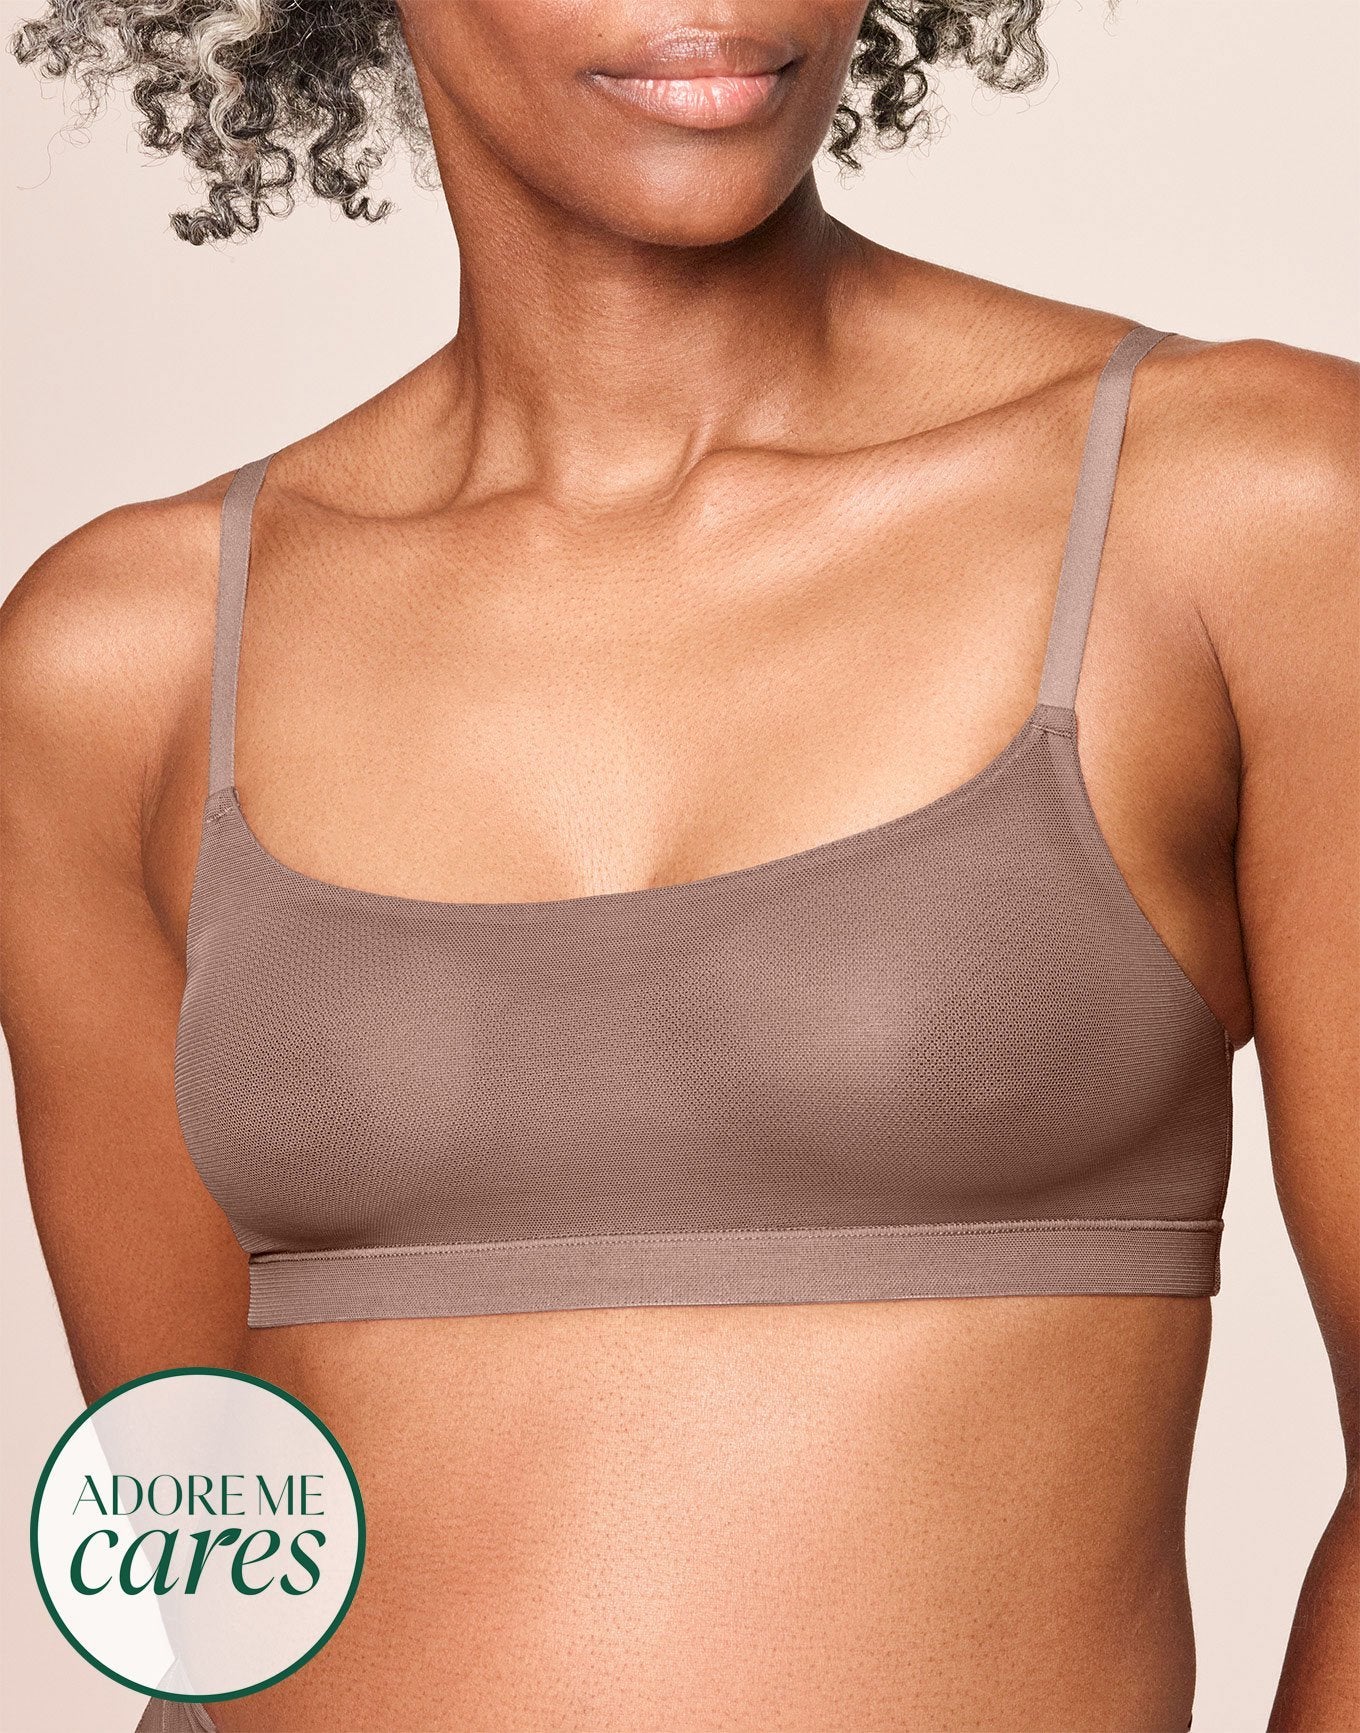 nueskin Olympia Mesh Scoop-Neck Shelf Bra in color Deep Taupe and shape bralette